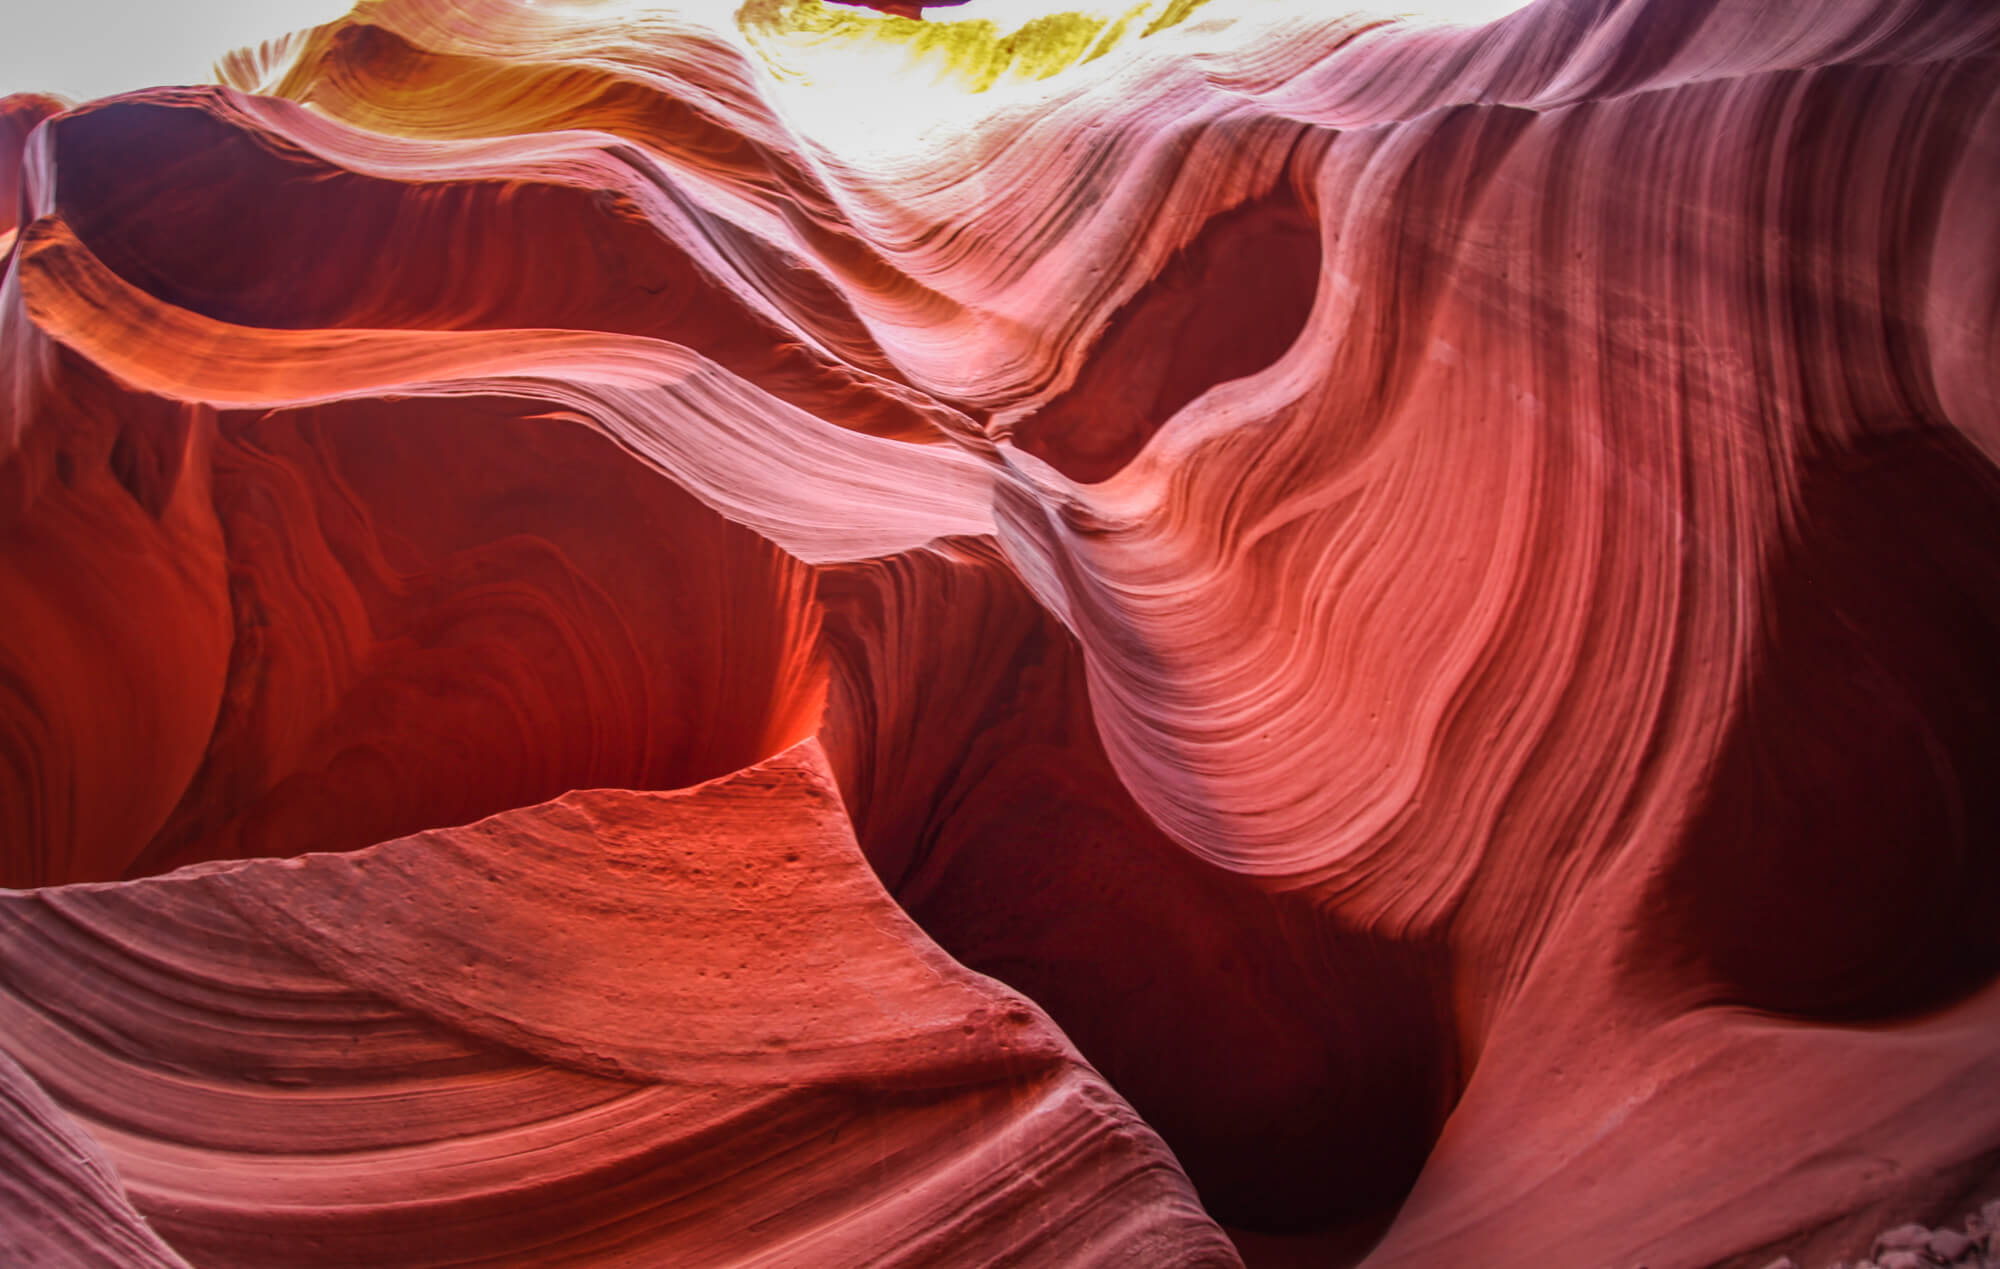  Antelope Canyon formations